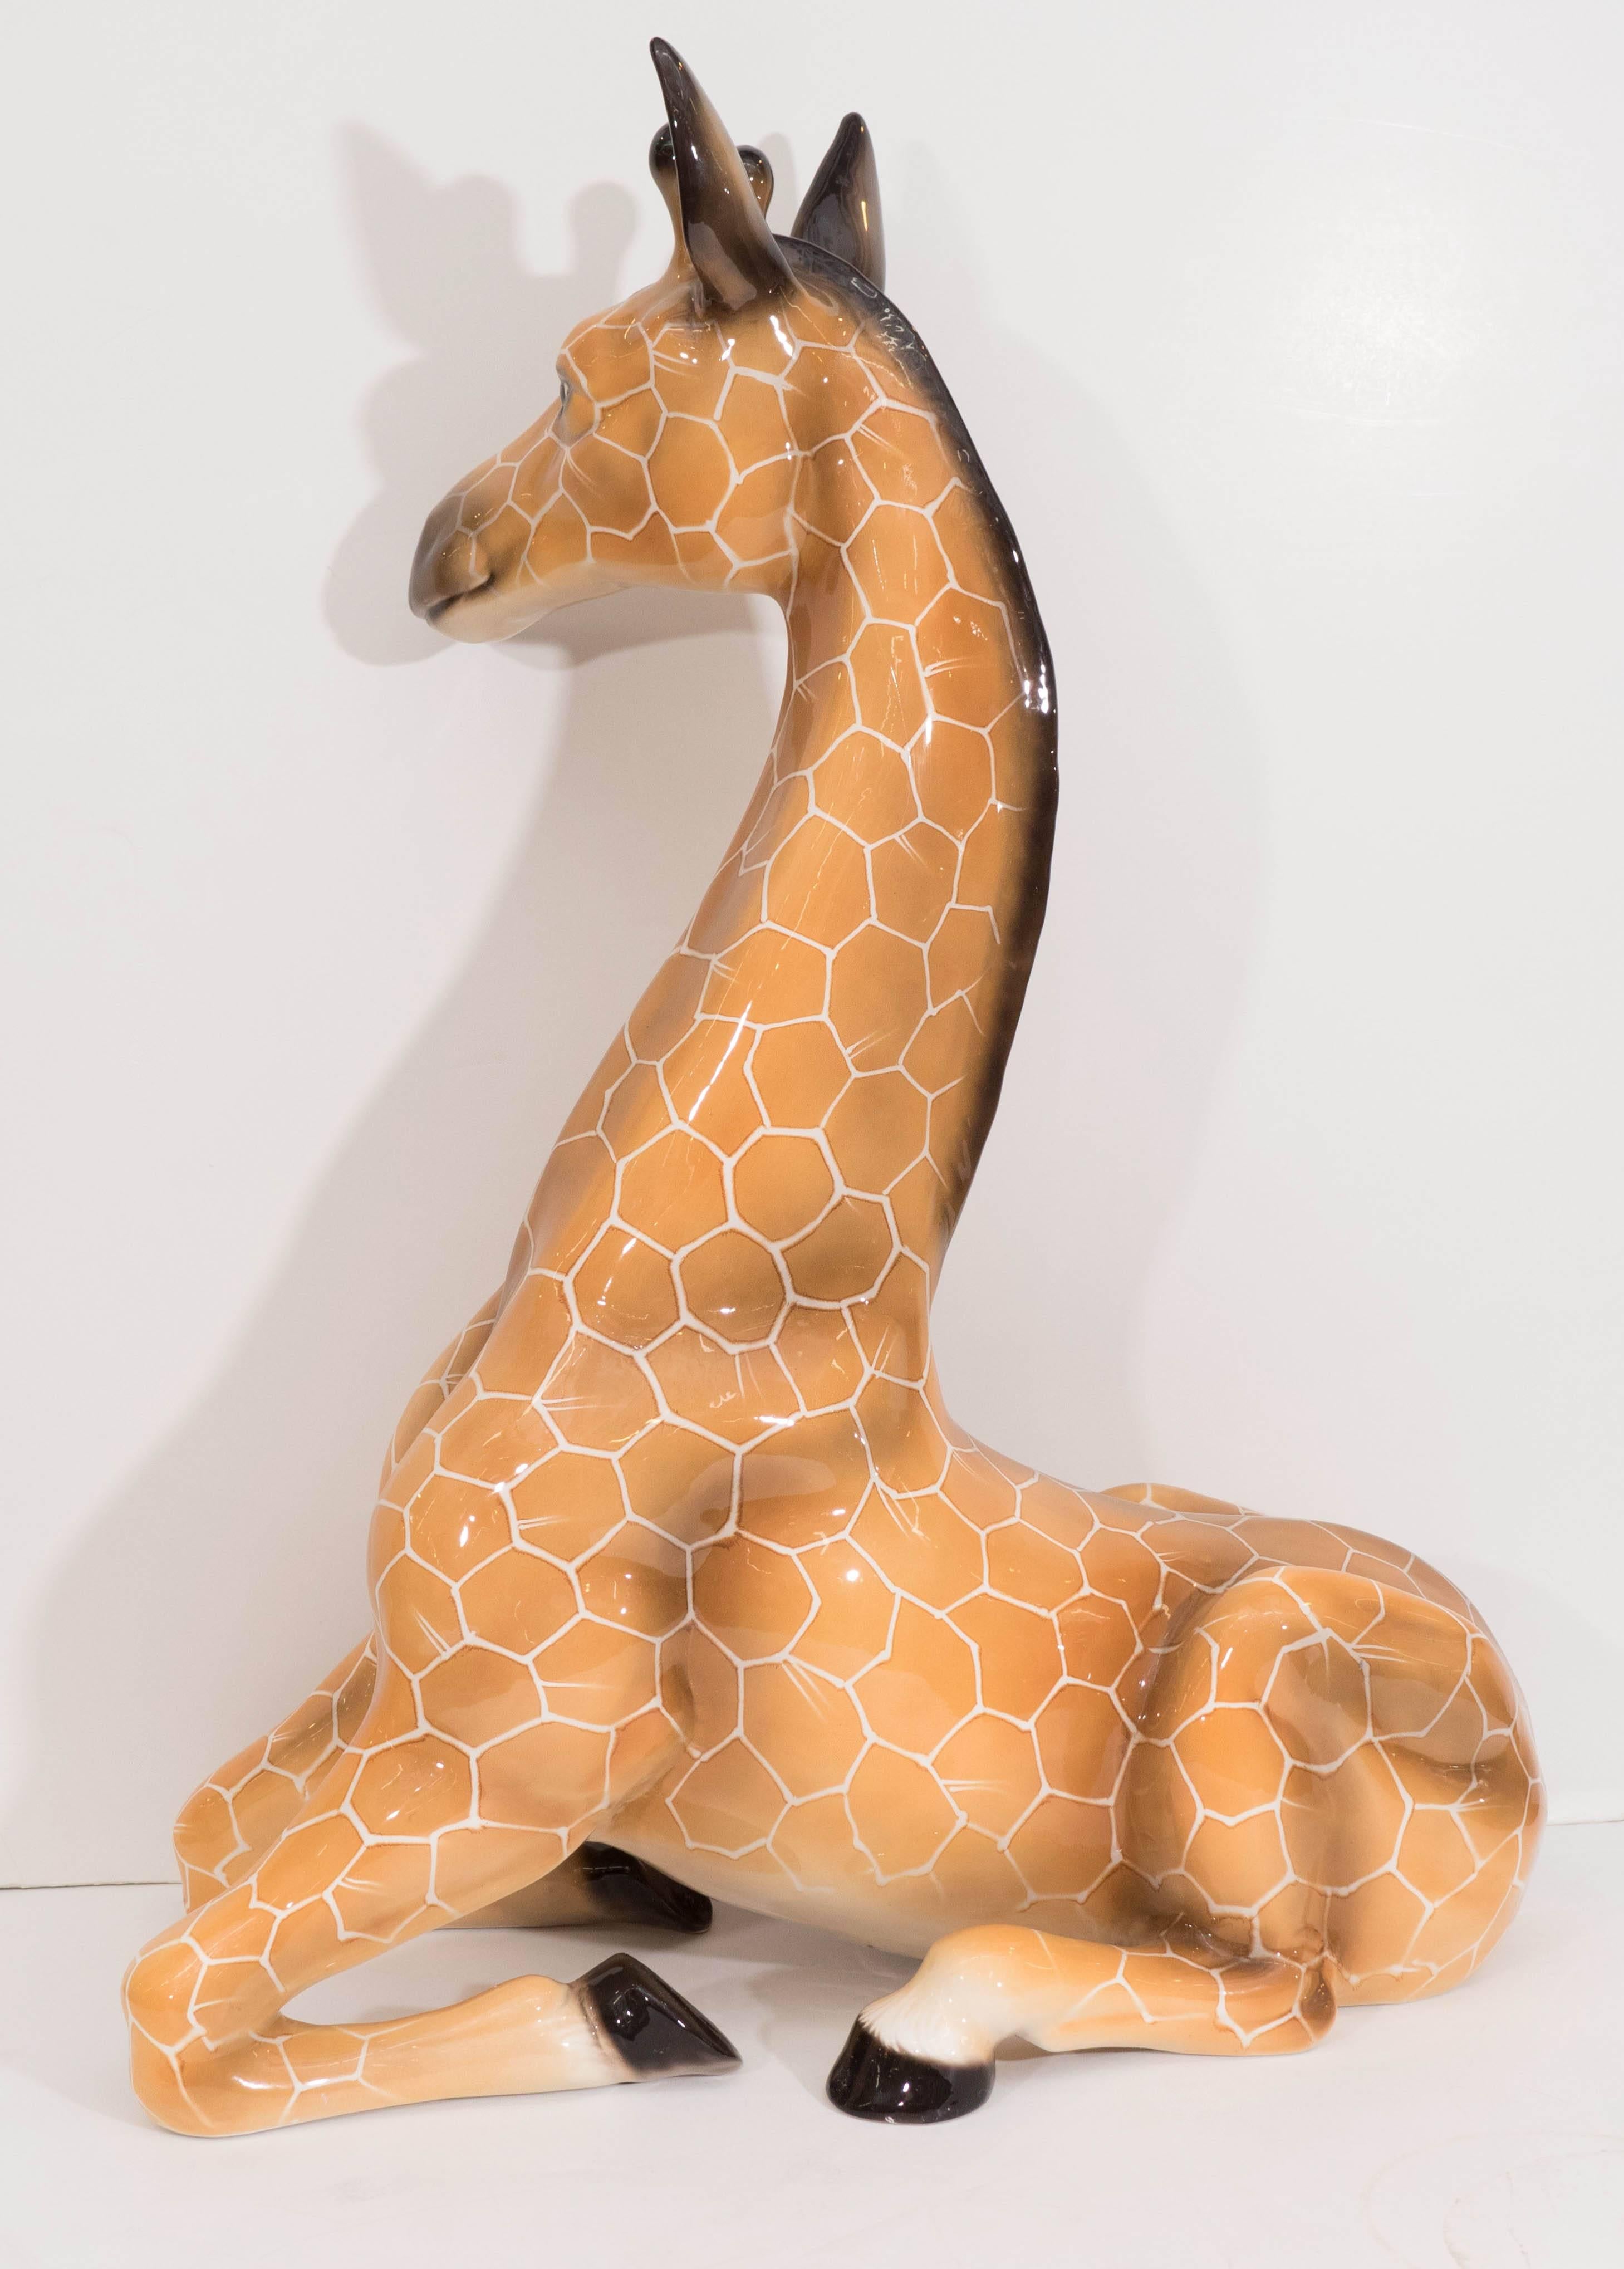 A large scale vintage sculpture of a giraffe, produced in Italy, circa 1970s, in glazed ceramic, aqua airbrush applied for fine shading and details. Markings include stamp [Made in Italy] and [P] etched to the bottom of the piece. Very good